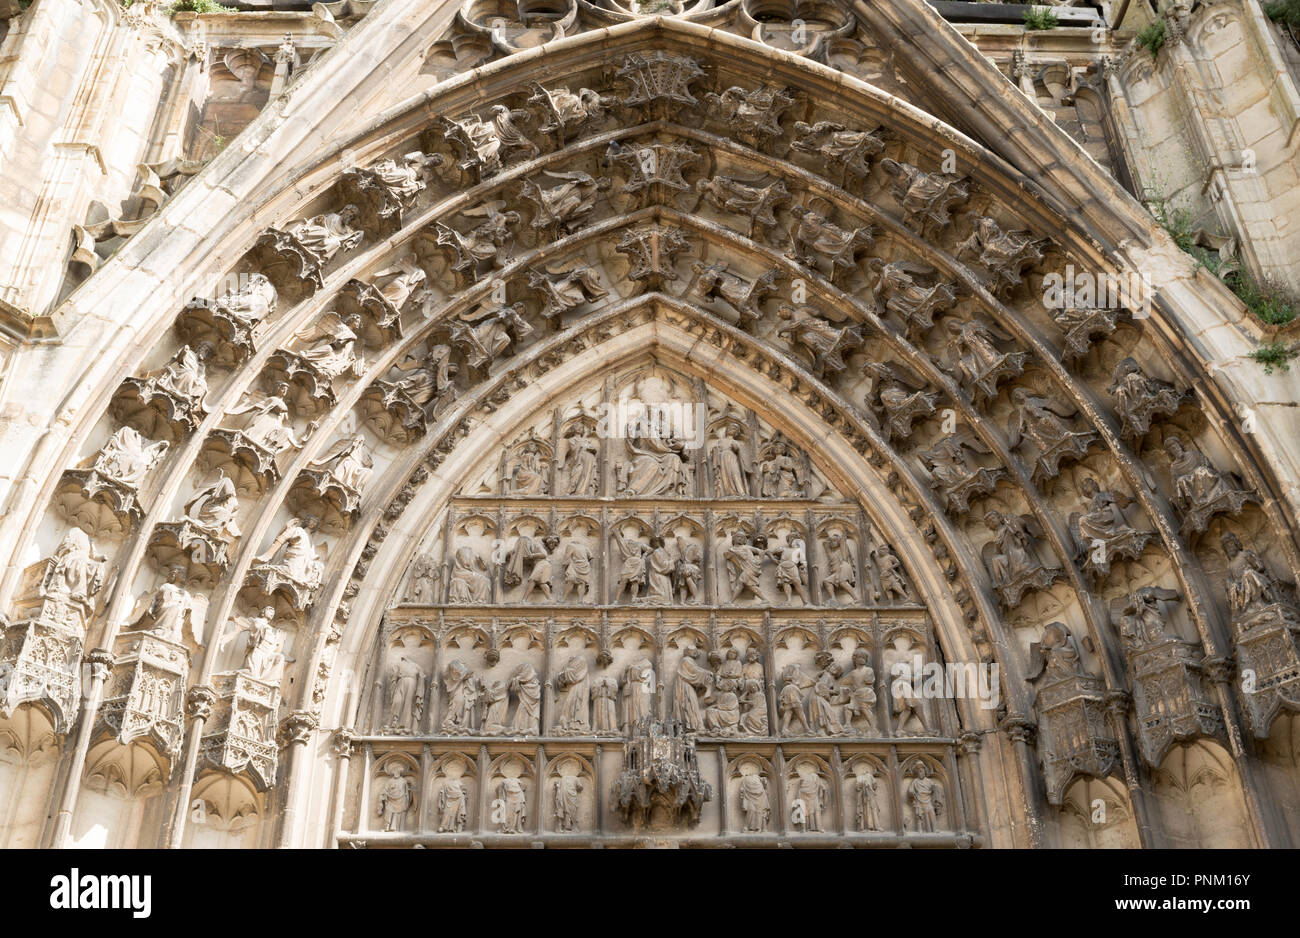 Tympanum above the main portal in the south transept of the Cathédrale Saint Étienne, in Auxerre, Burgundy, France, Europe Stock Photo